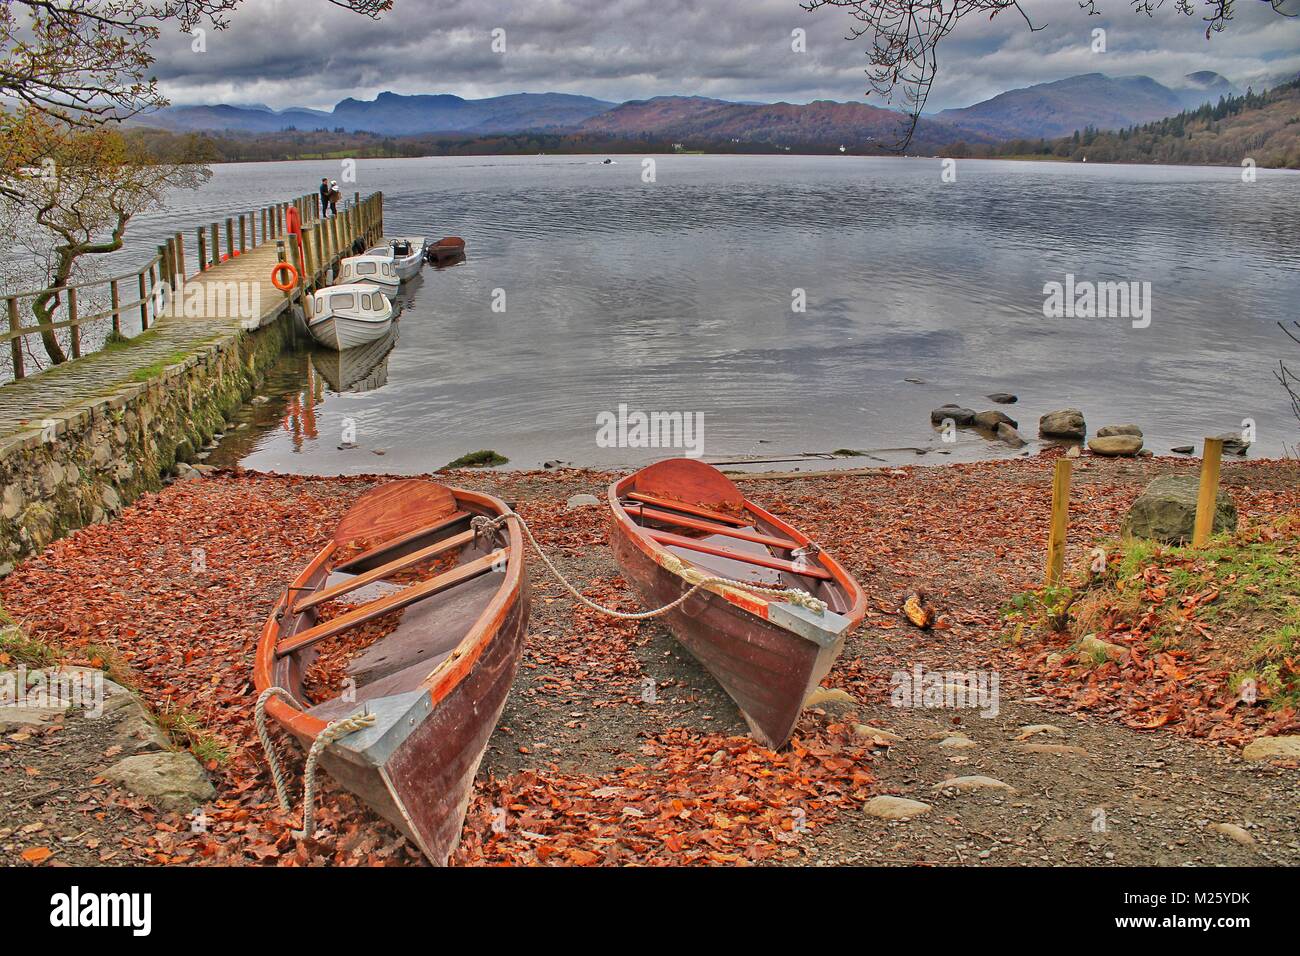 Waiting for visitors, rowing boats on Lake Windermere in Autumn Stock Photo